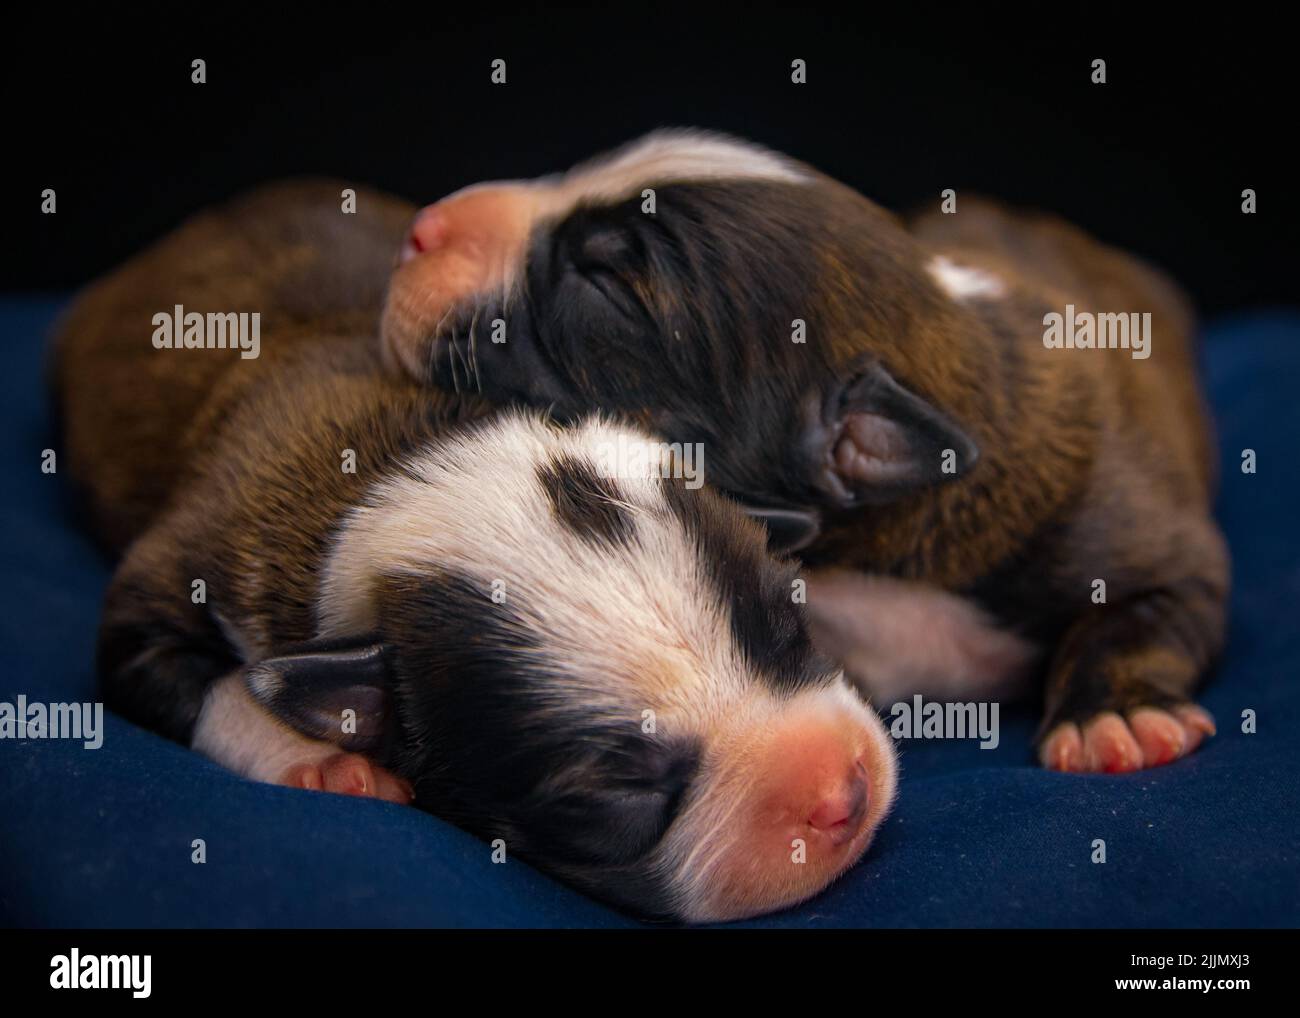 A closeup shot of two American Staffordshire Terrier dogs sleeping on a blue pillow Stock Photo